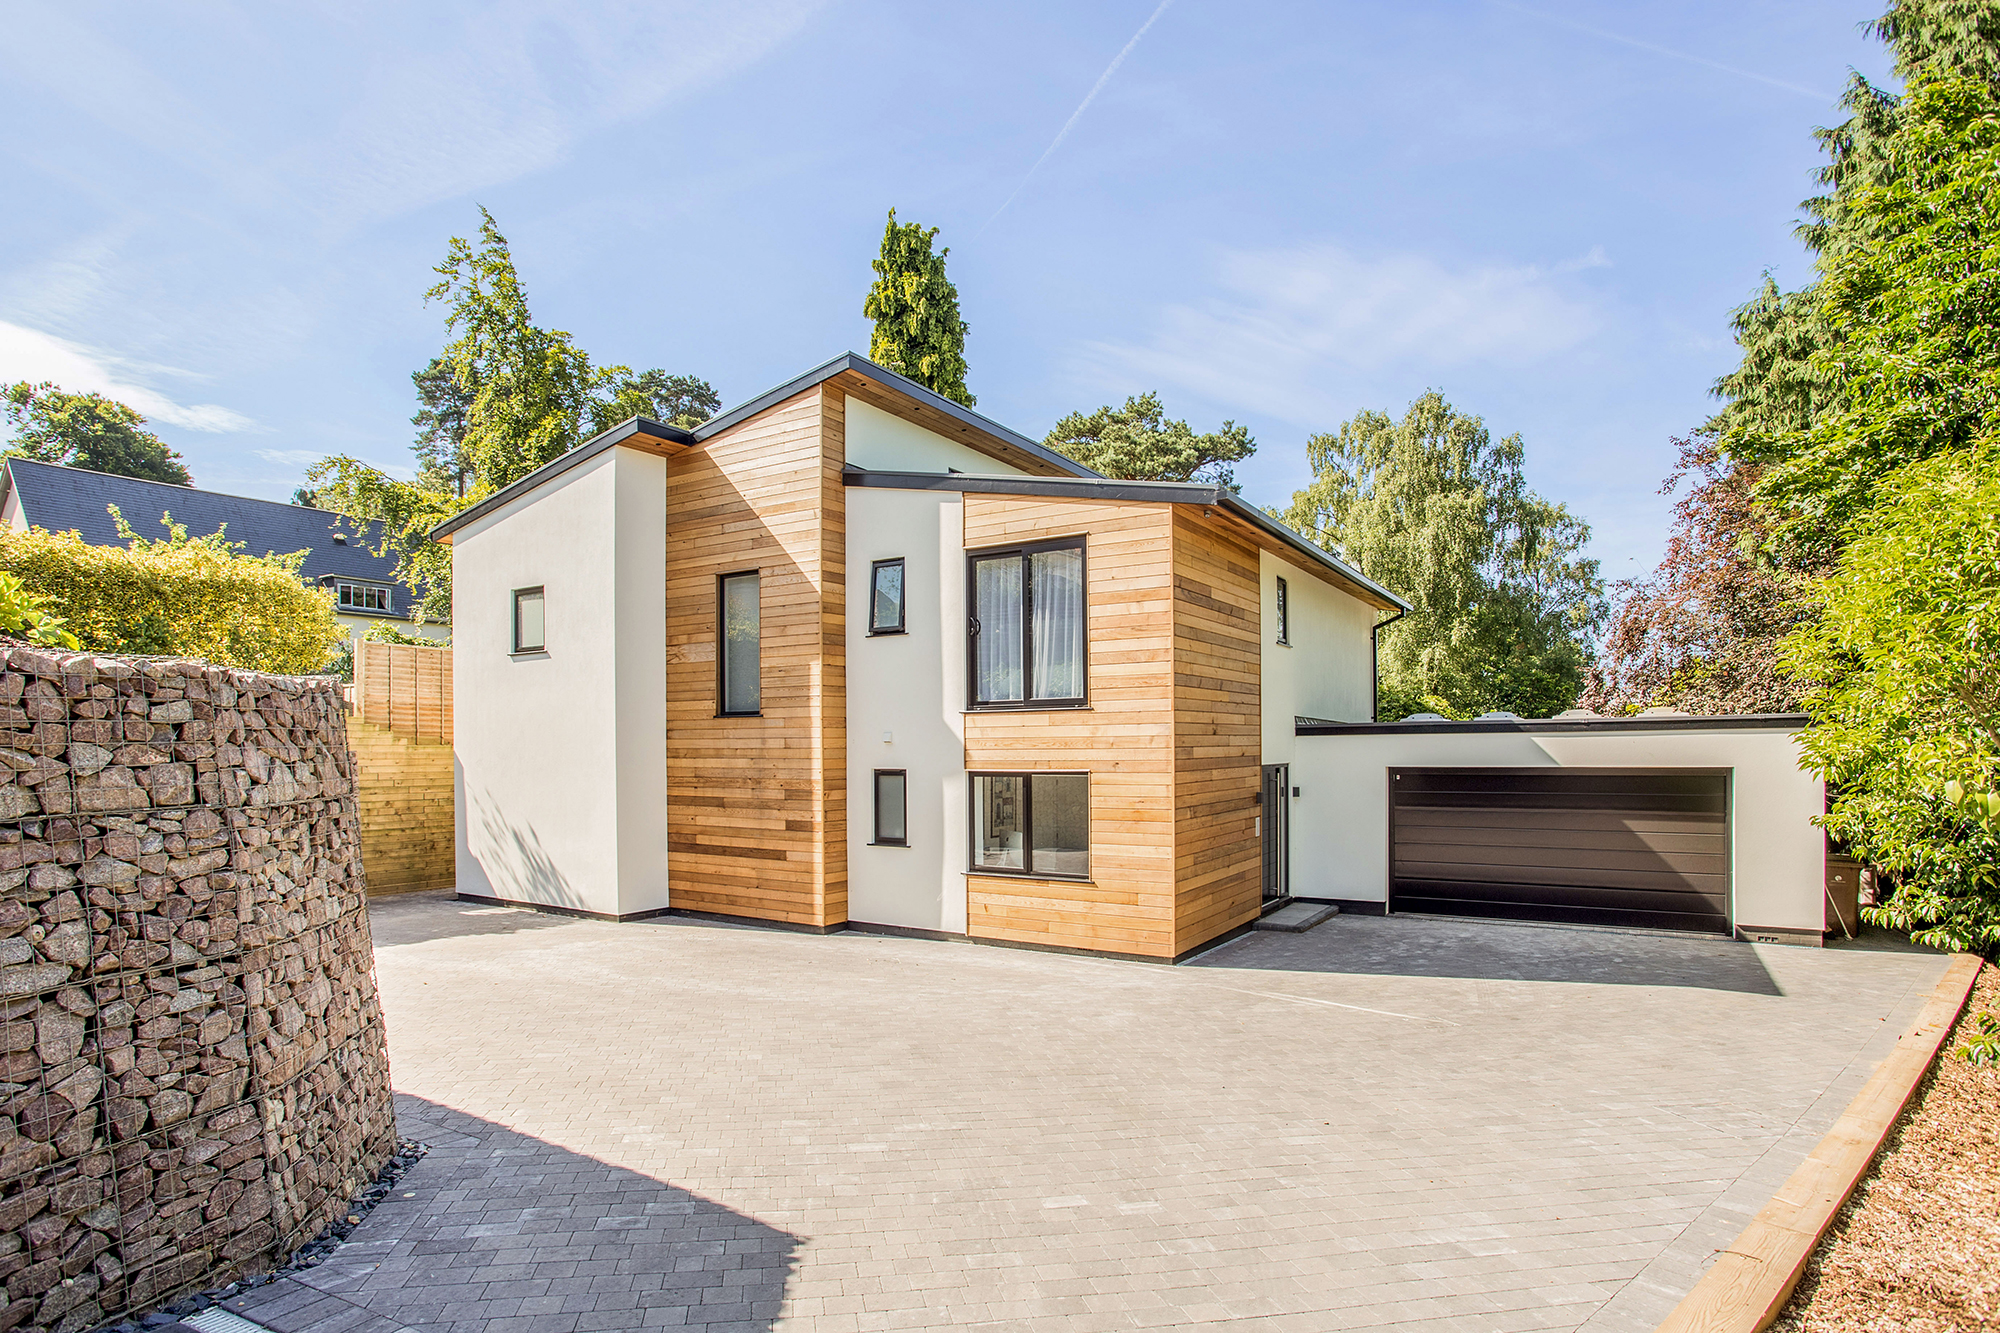 D&M modern build with wood cladding